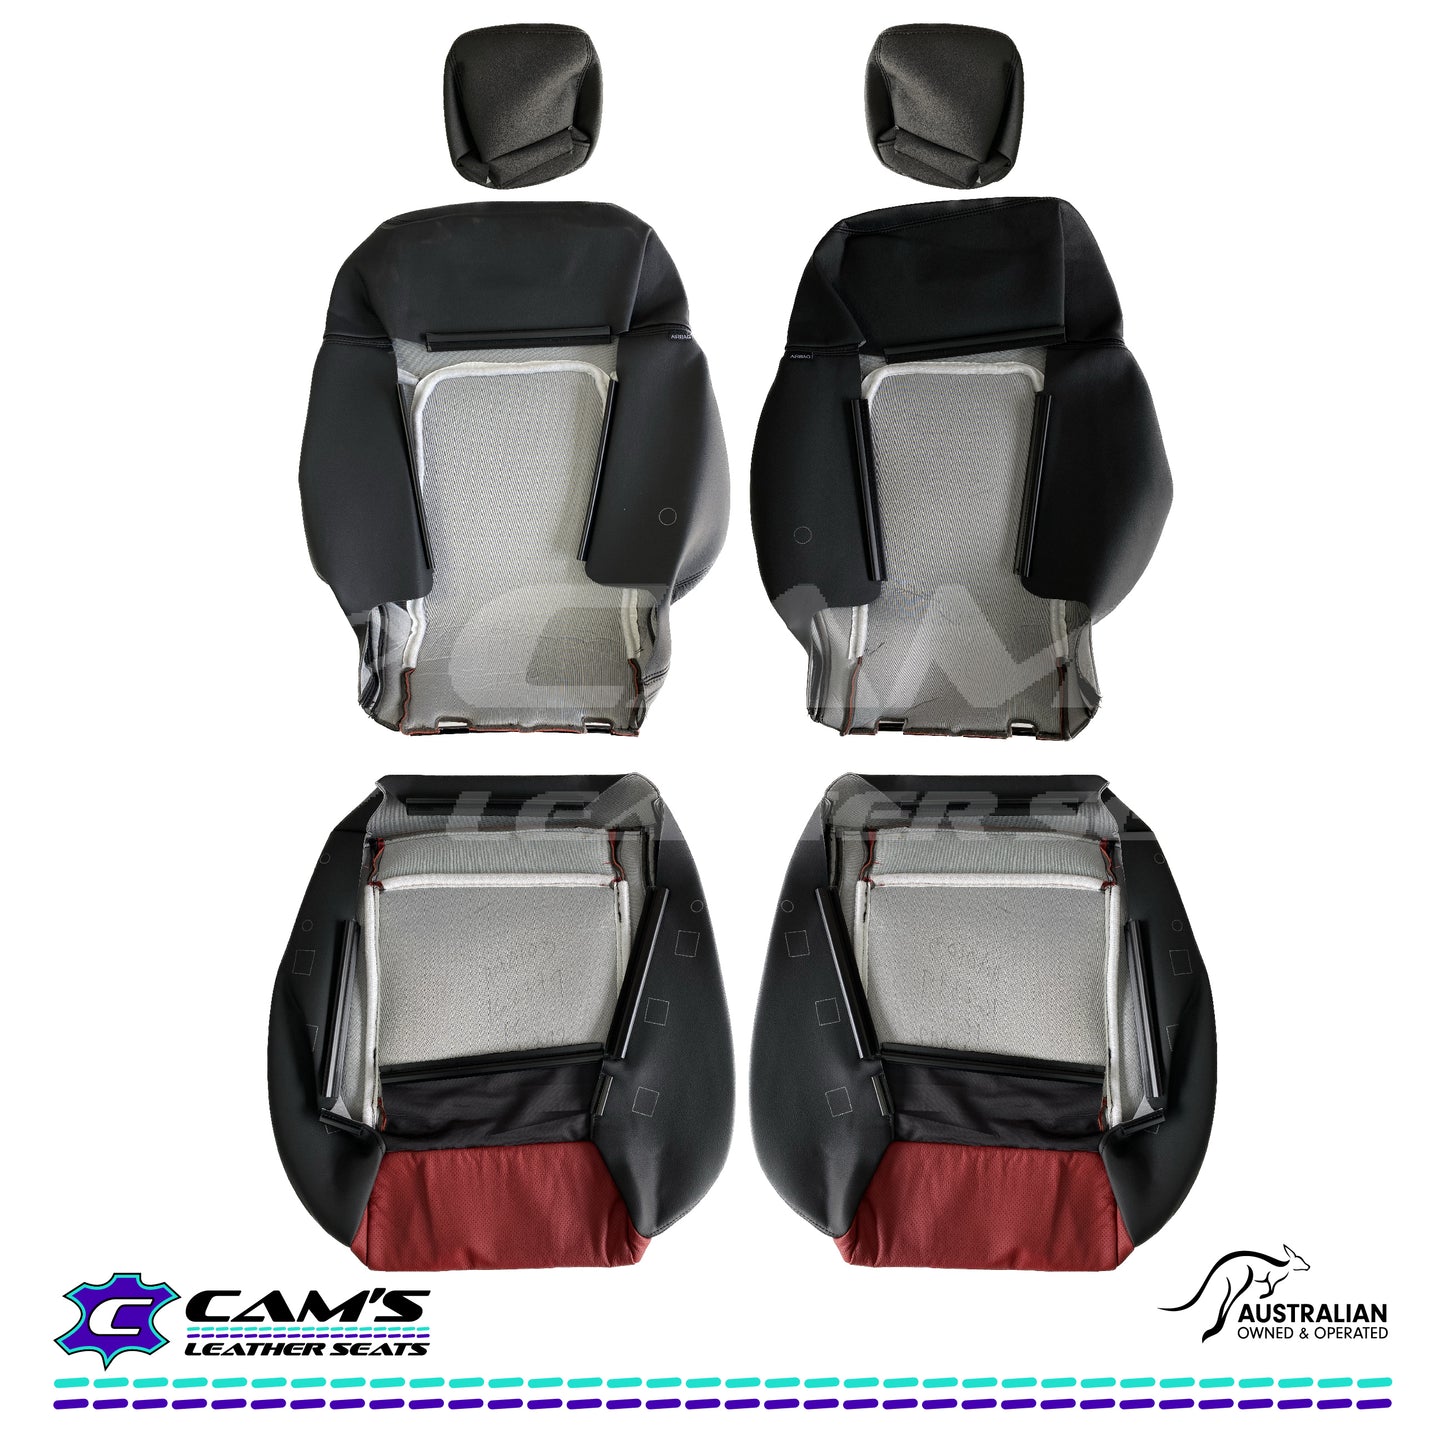 LEATHER SEATS TRIM KIT FOR VE SS 2 FRONT SEATS OR UTE ONYX & RED HOT INSERTS